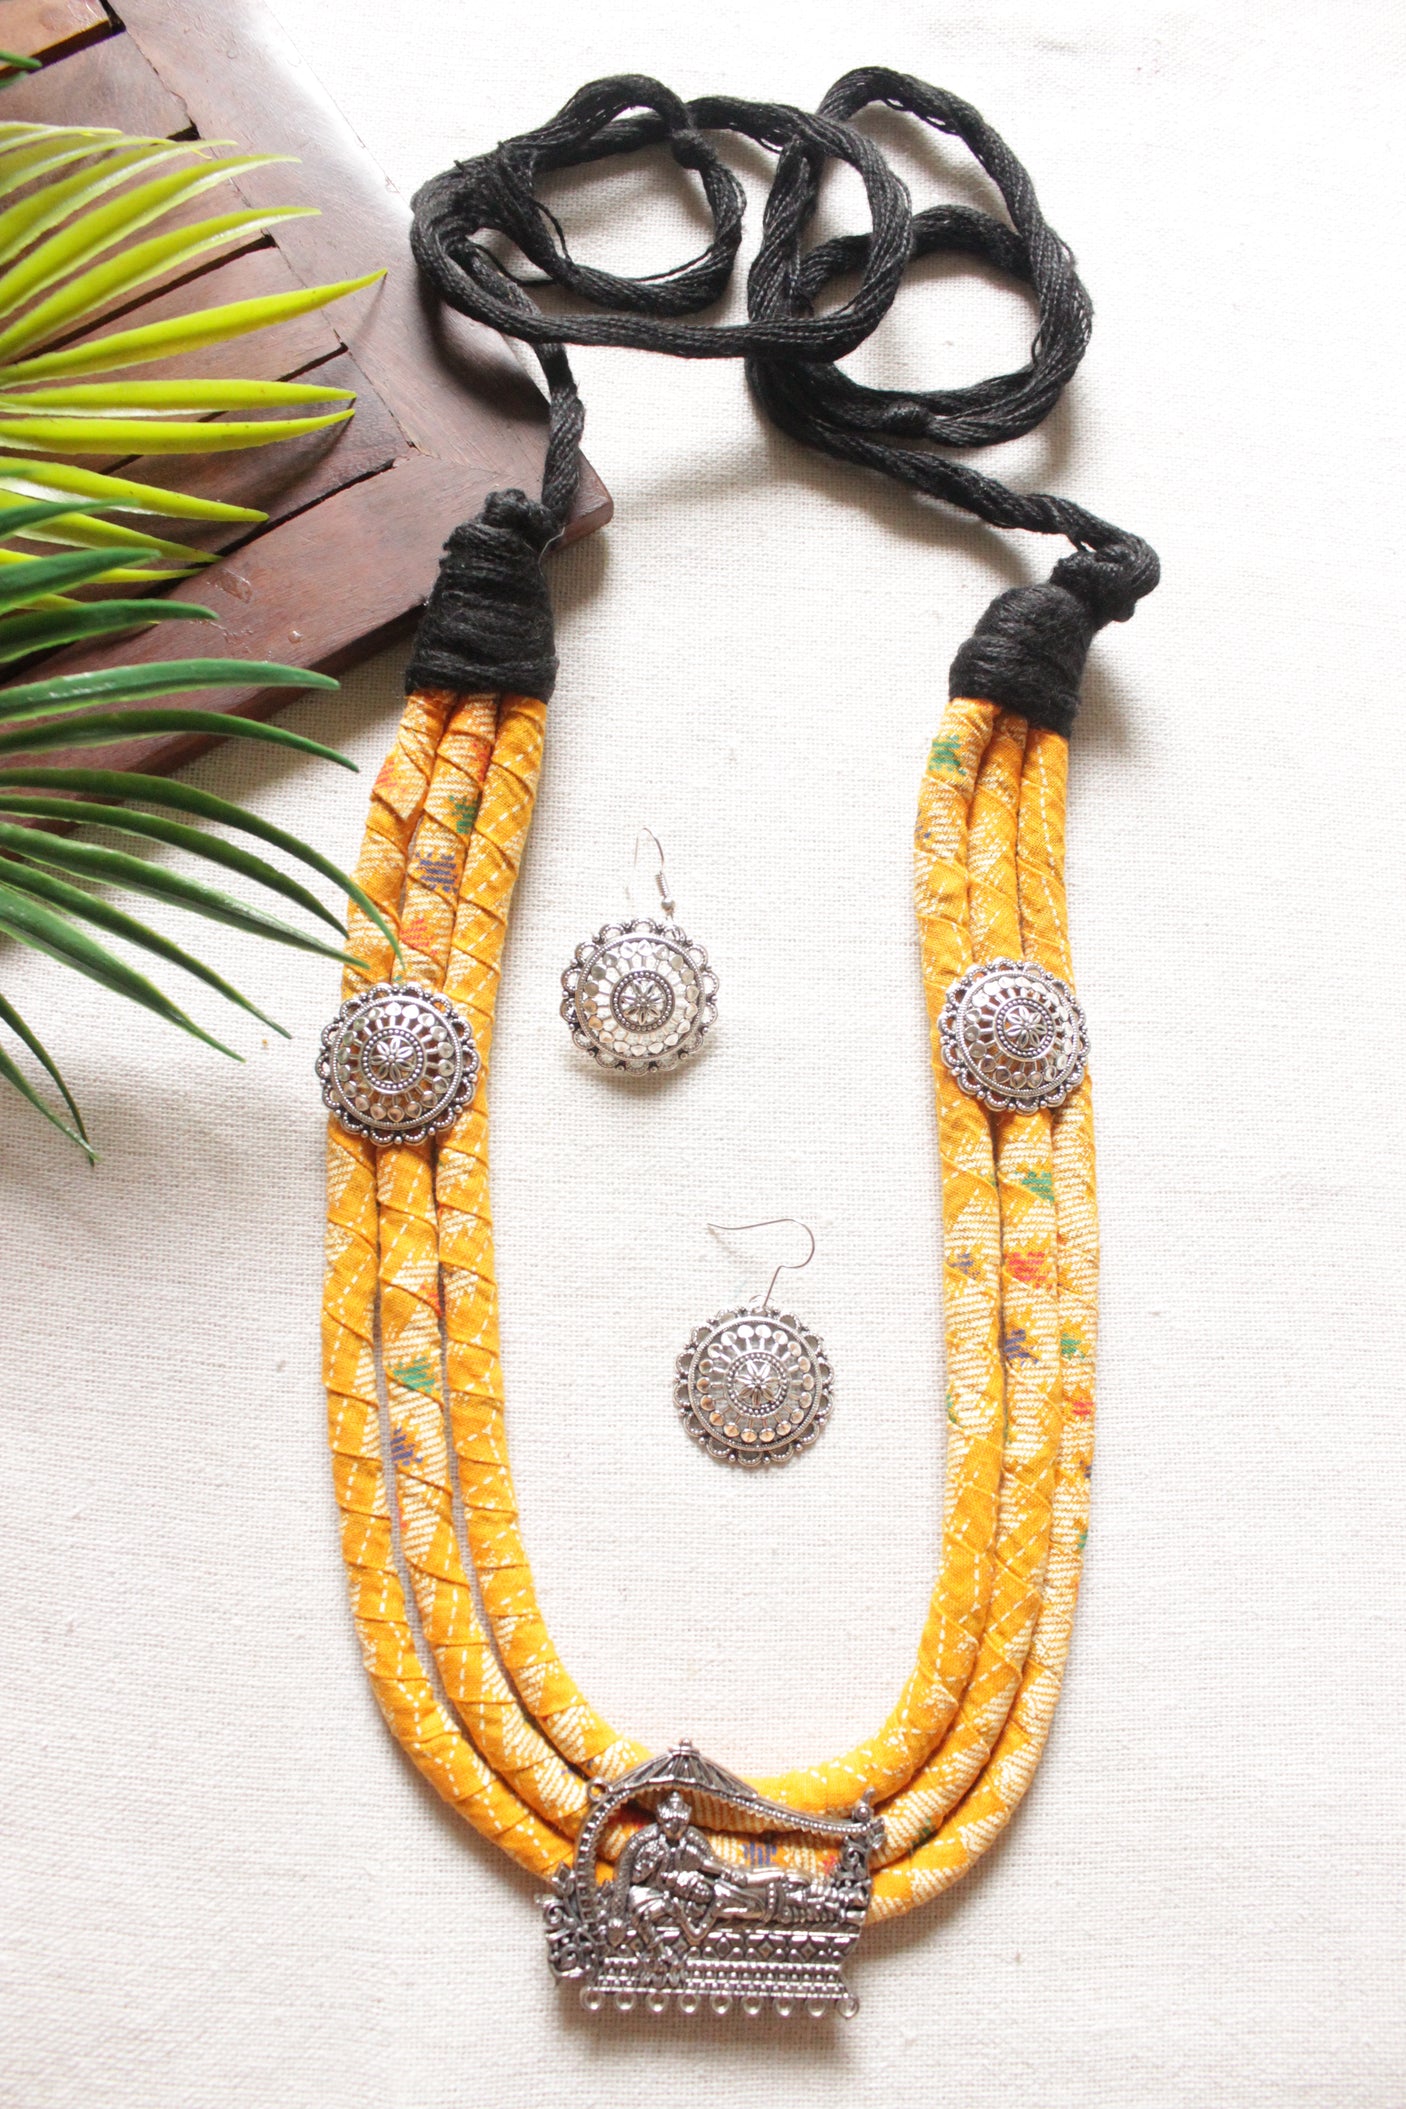 3-Layer Yellow Fabric Wrapped Around Rope Necklace Set Embellished with Metal Charms